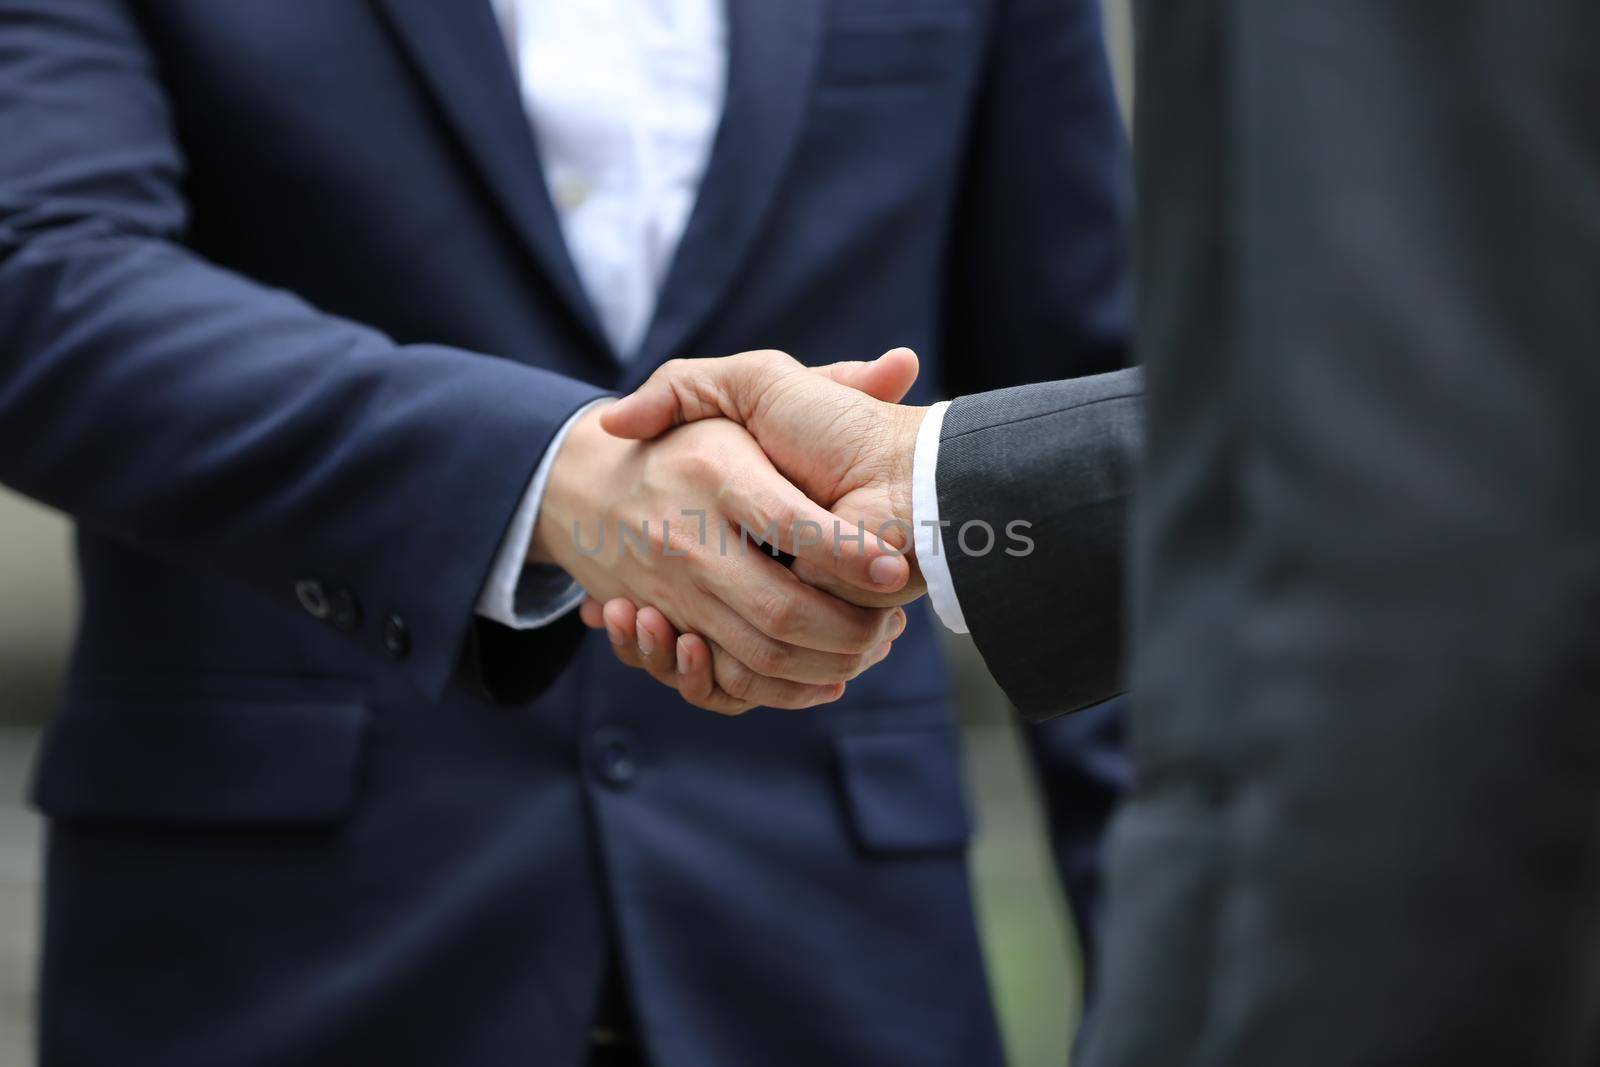 Business people shaking hands, finishing up a papers signing. Meeting, contract and lawyer consulting concept.